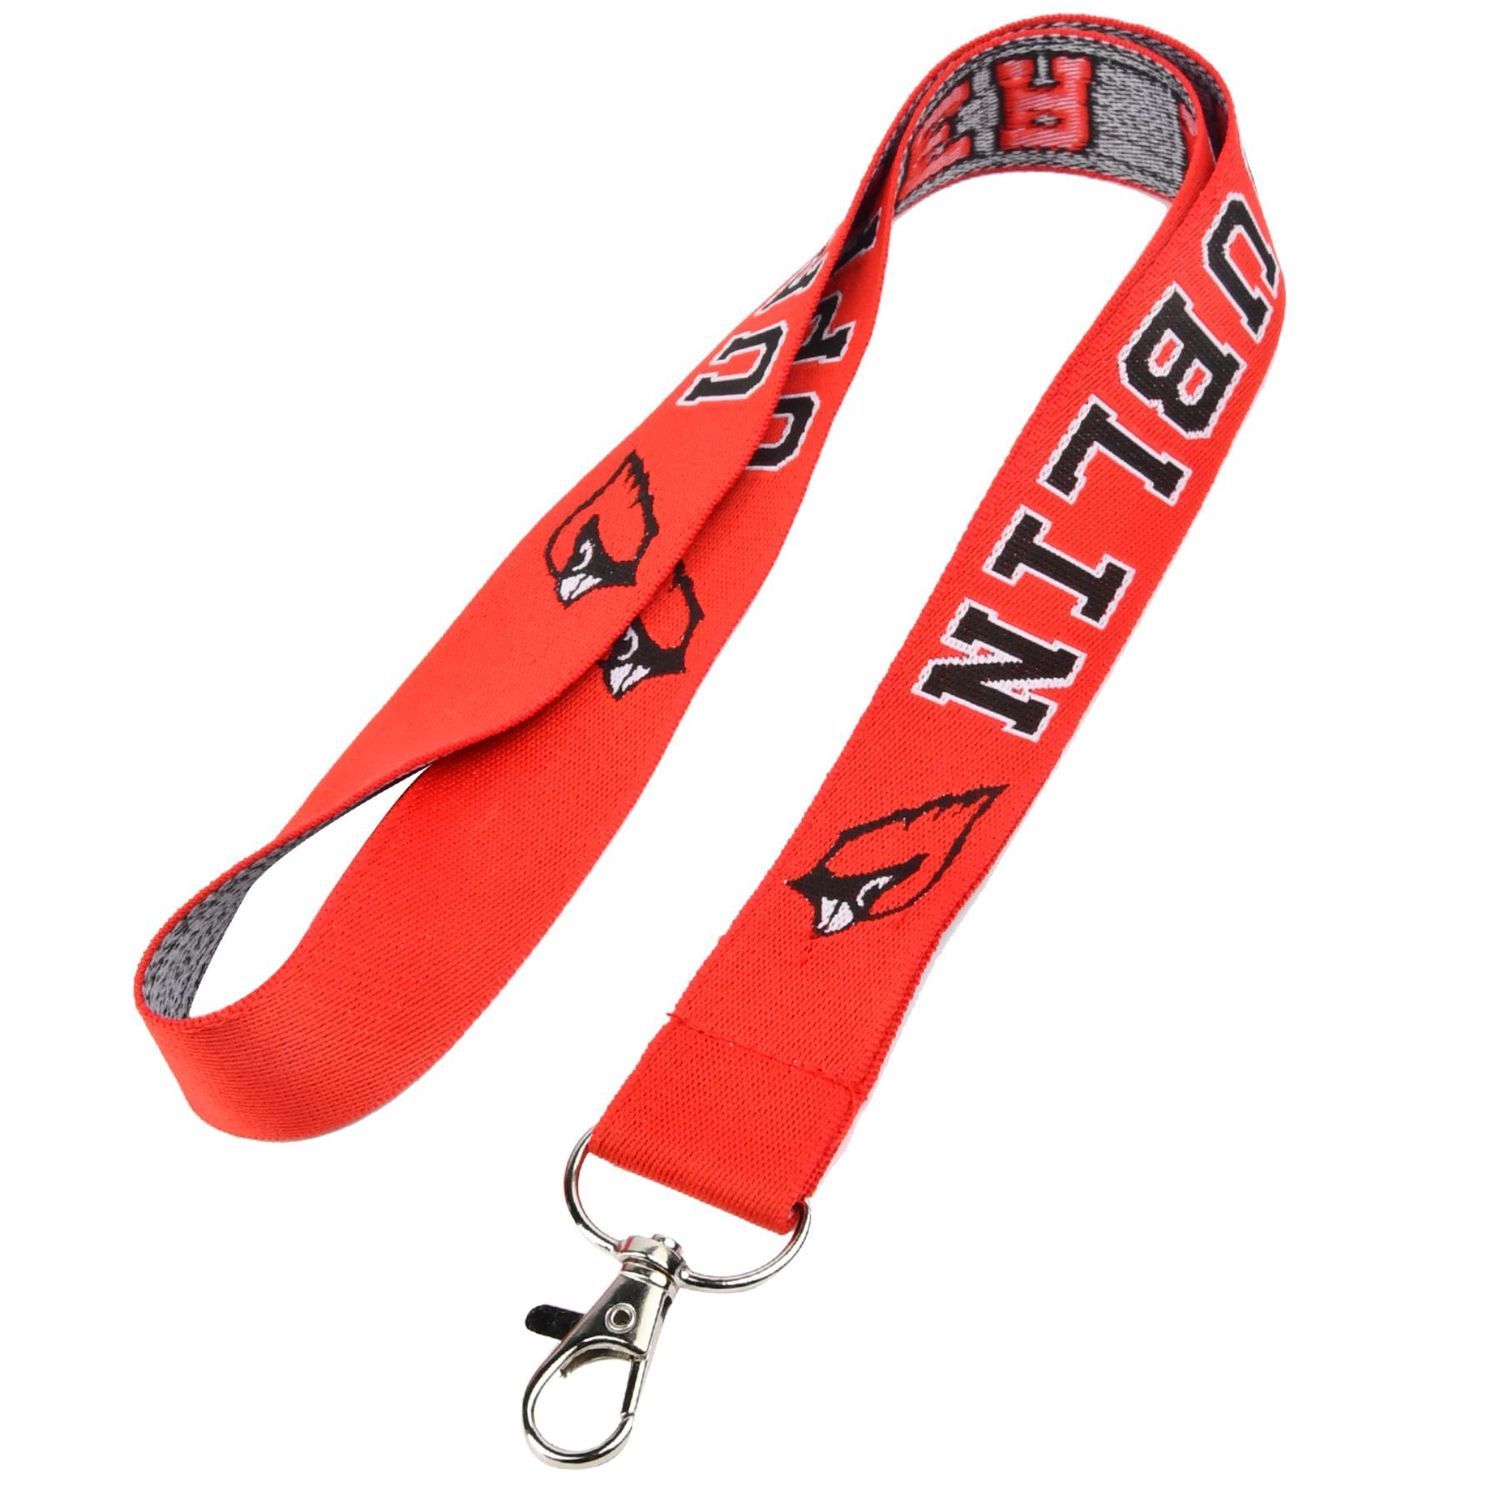 Woven Lanyards 3/4" inch Polyester 36" L x 3/4" W - Embroidered